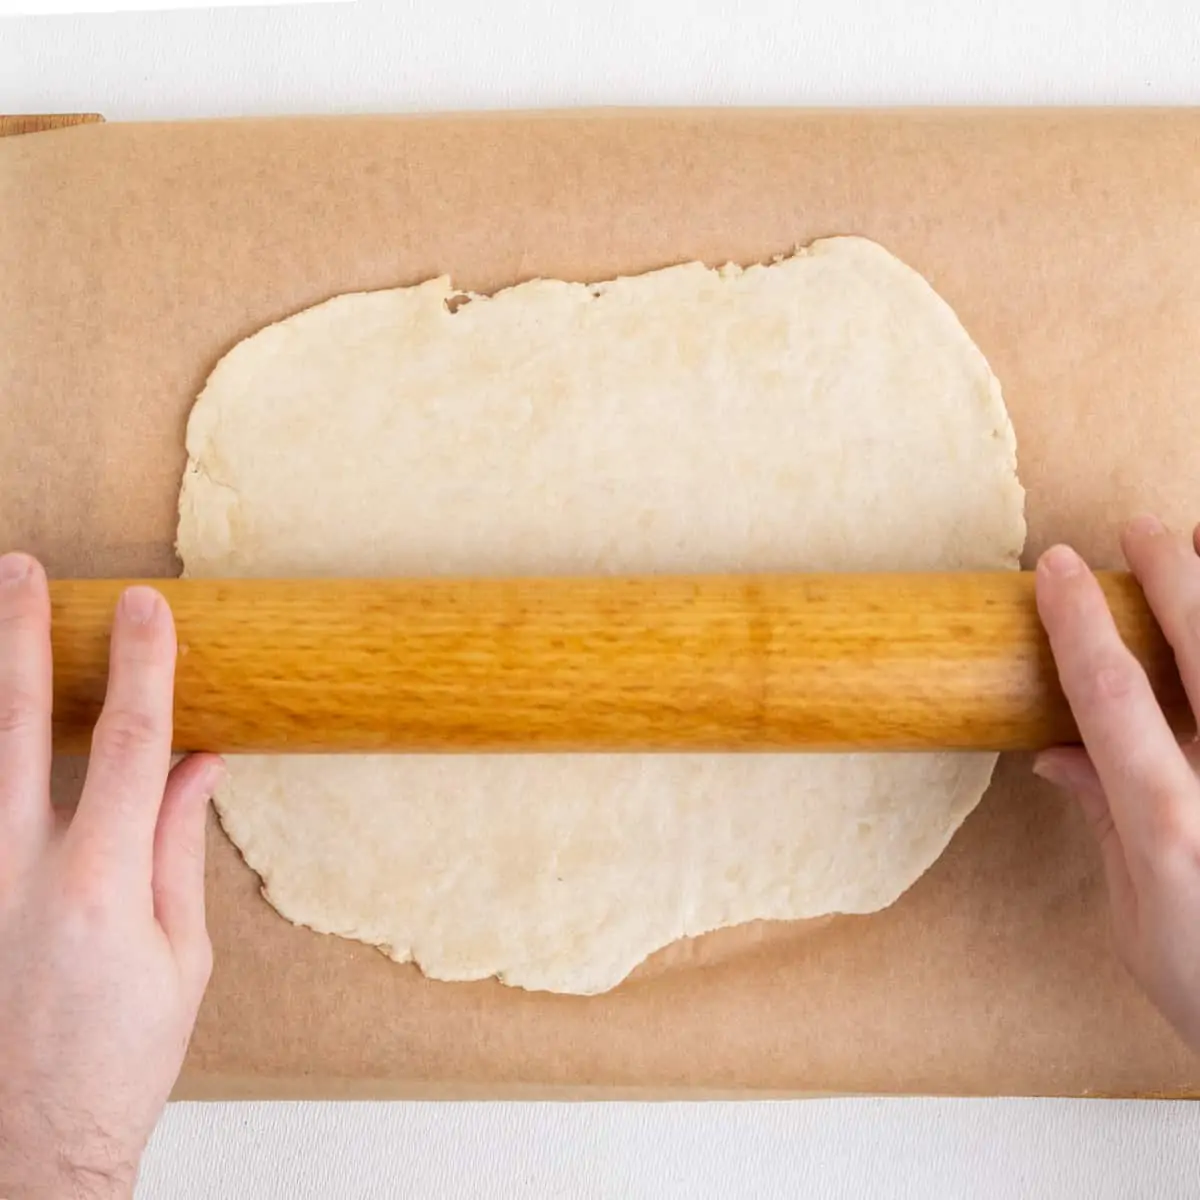 Rolling out the dough on a piece of parchment paper.